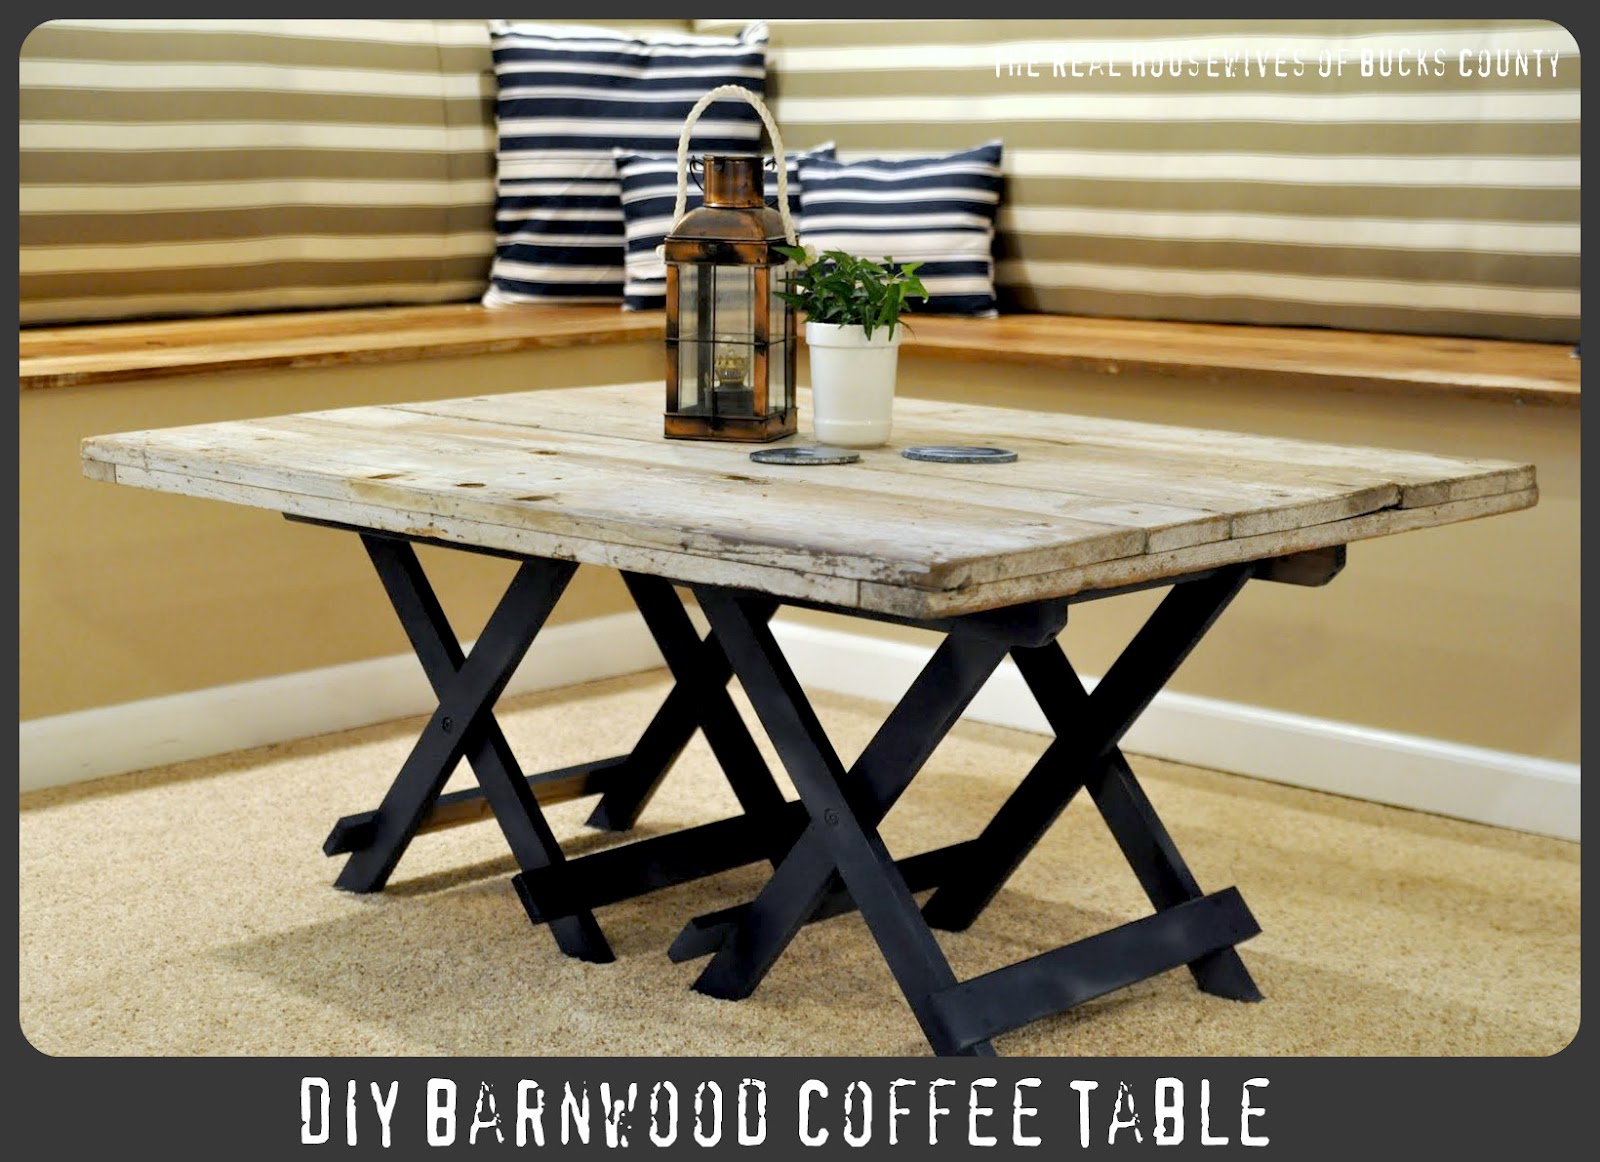 Upcycle wood pallets into a DIY coffee table.